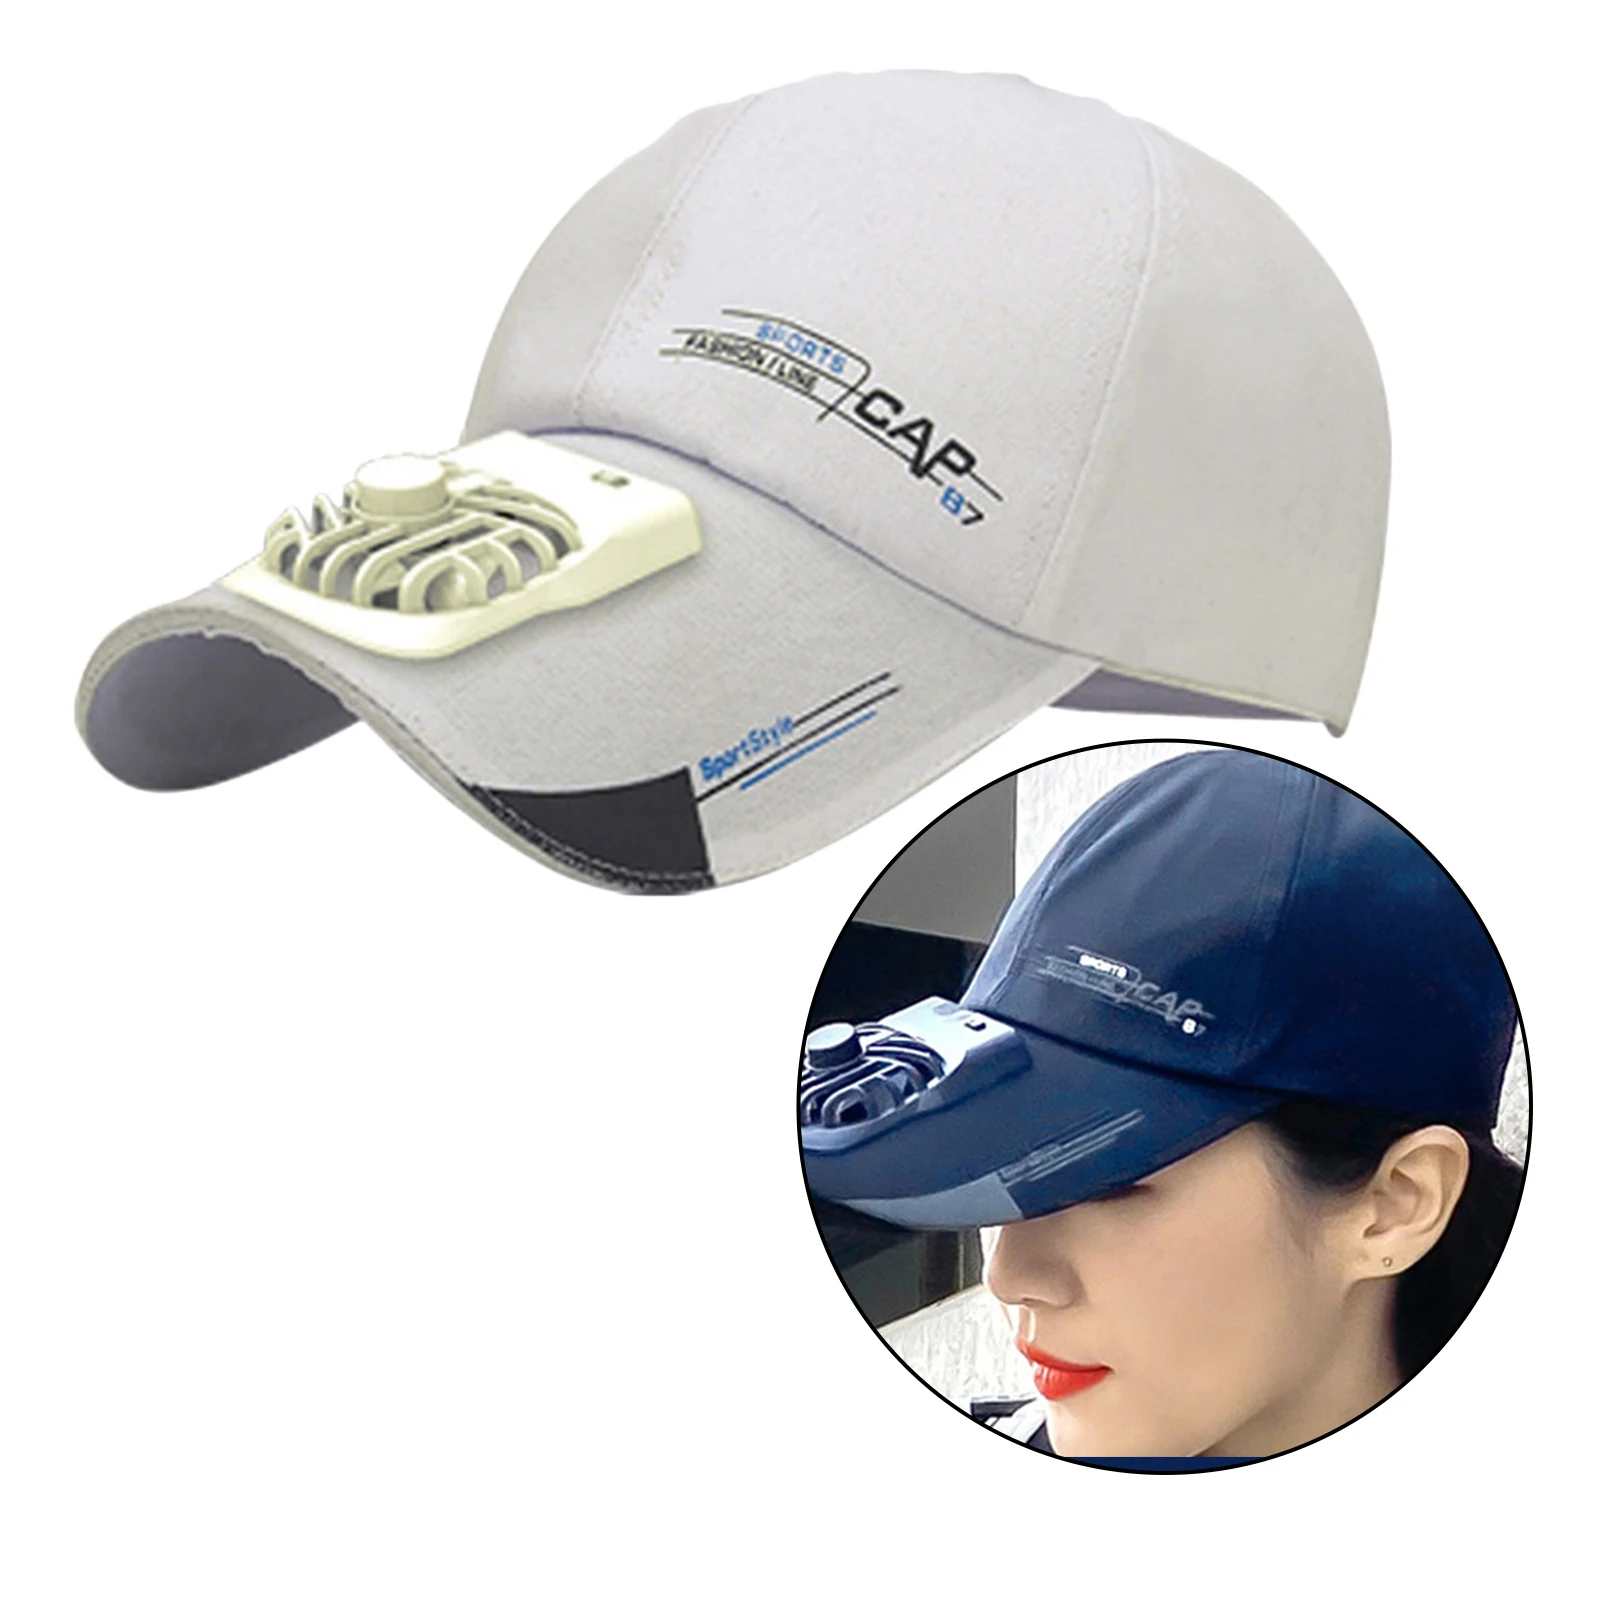 Baseball Cap with Fan USB Summer Outdoor Sun Hat Cap,The Cooling Fan for Golf Baseball Sport Outdoor Camping Backpacking